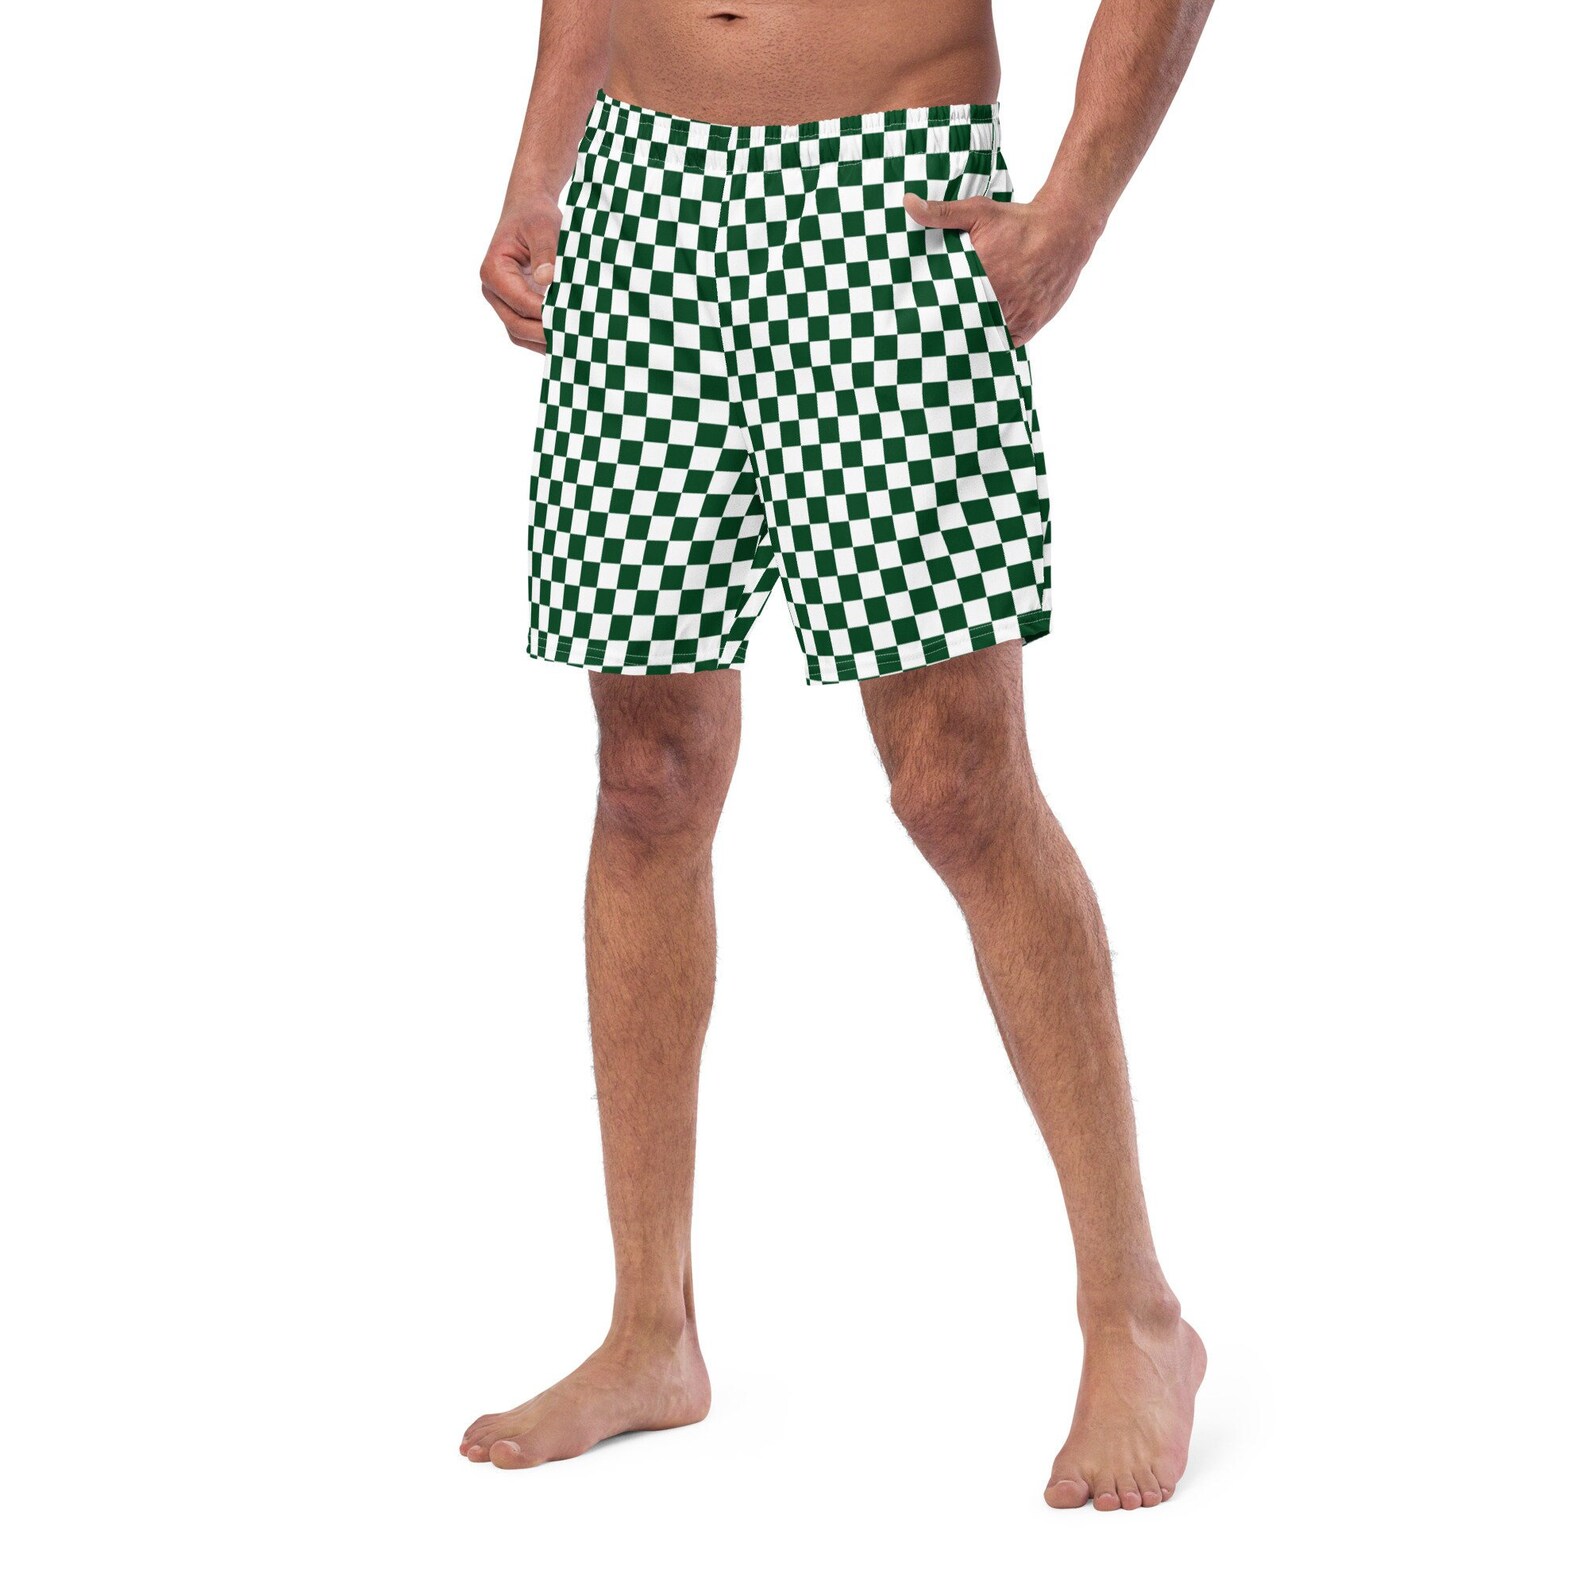 If you're looking to surprise a volleyball enthusiast during the Paris 2024 Olympics, my uniquely designed beach volleyball pants provide a fitting tribute to the flag-bearing athletes who inspire us.